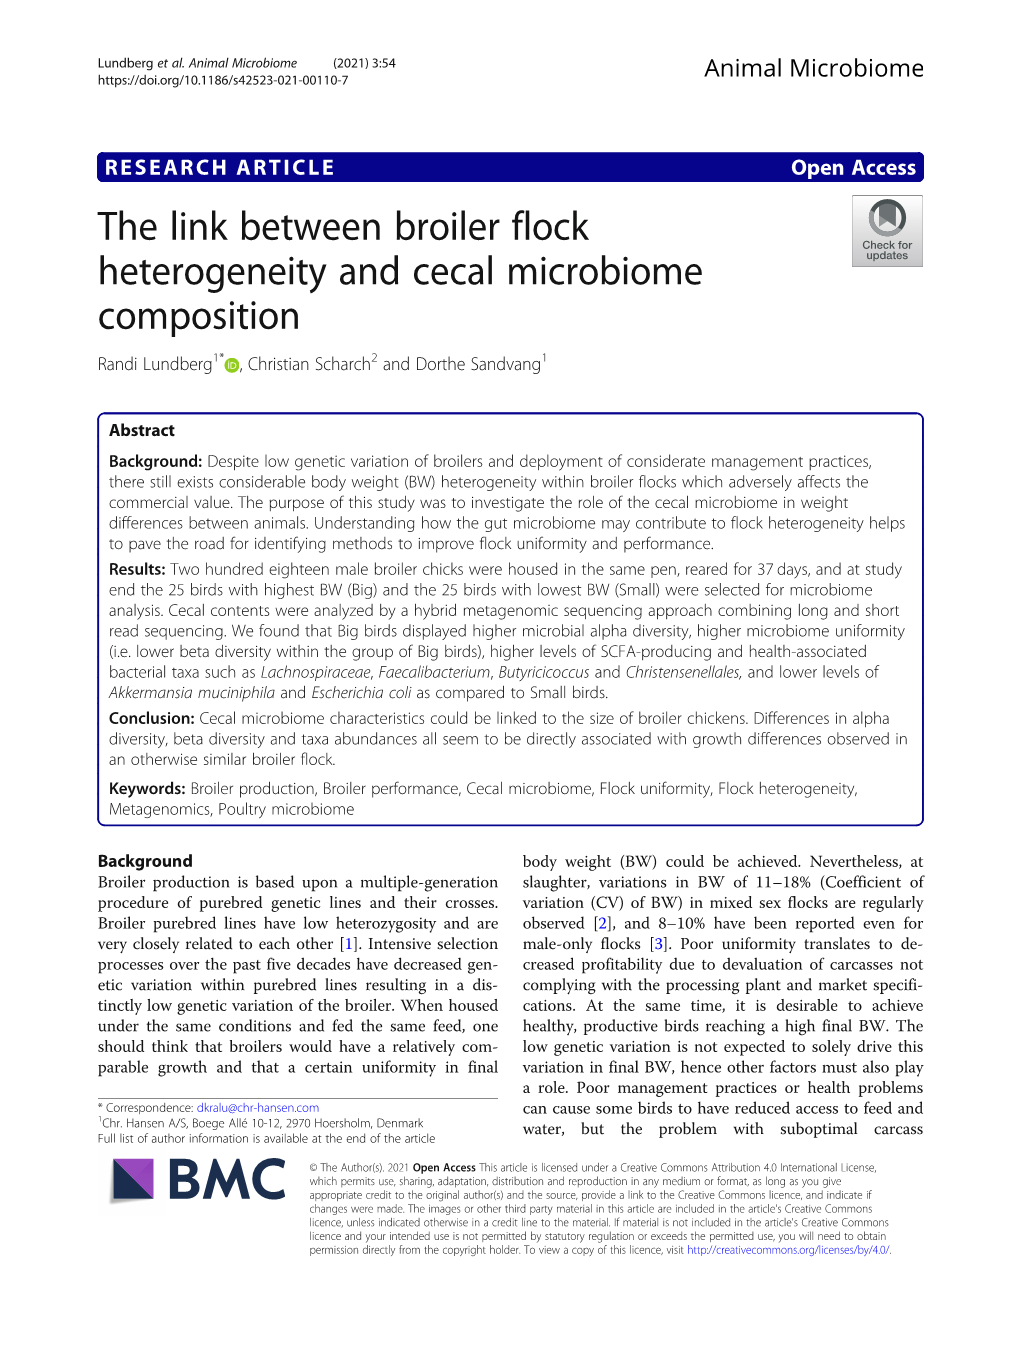 The Link Between Broiler Flock Heterogeneity and Cecal Microbiome Composition Randi Lundberg1* , Christian Scharch2 and Dorthe Sandvang1